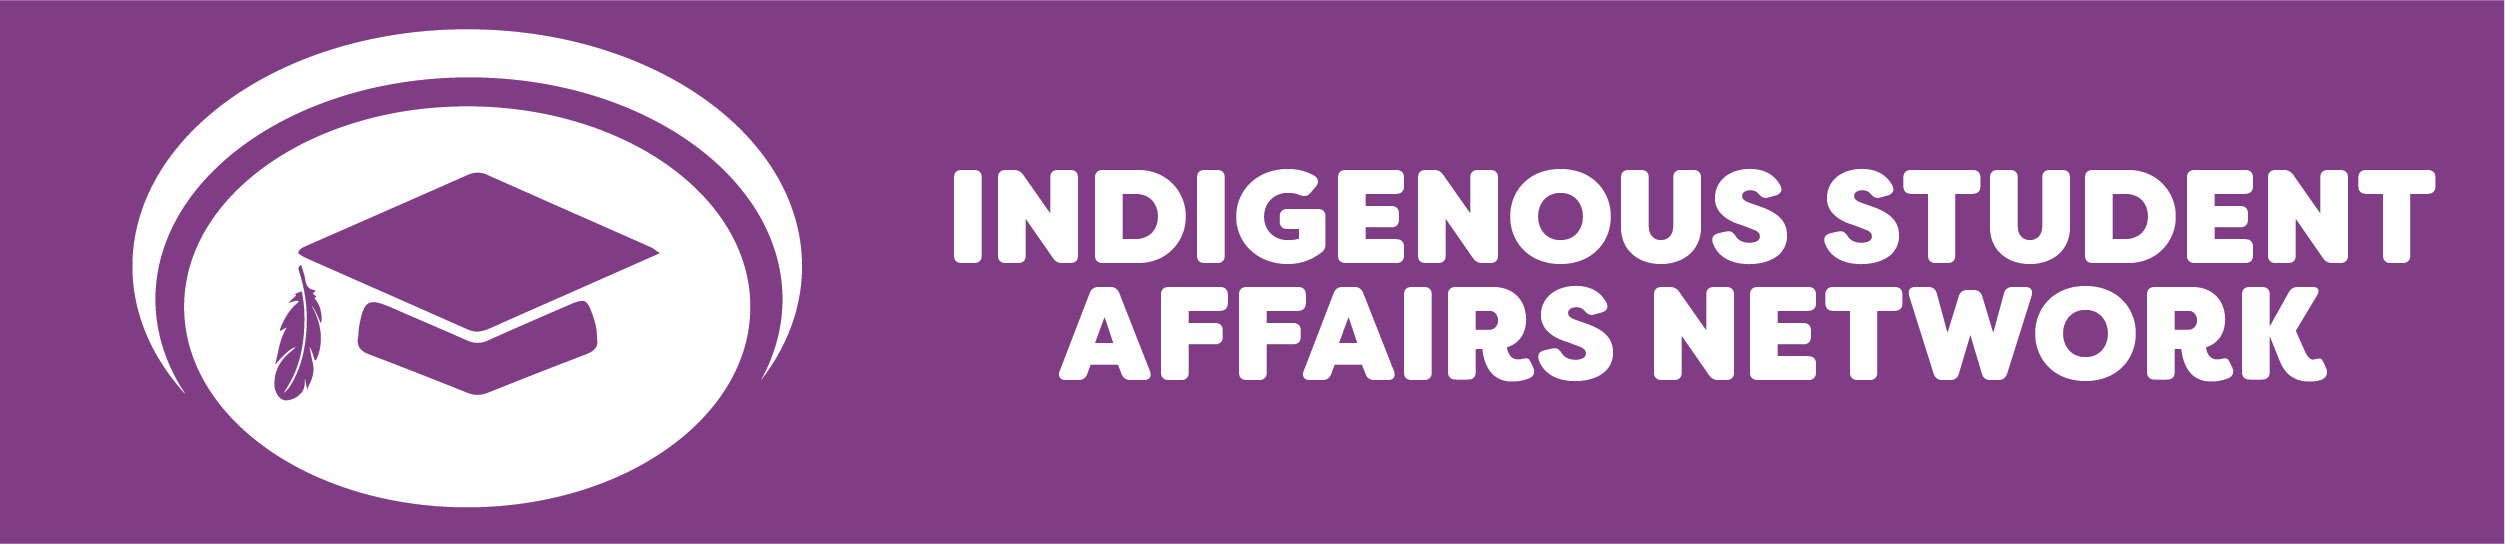 Indigenous Student Affairs Network and logo